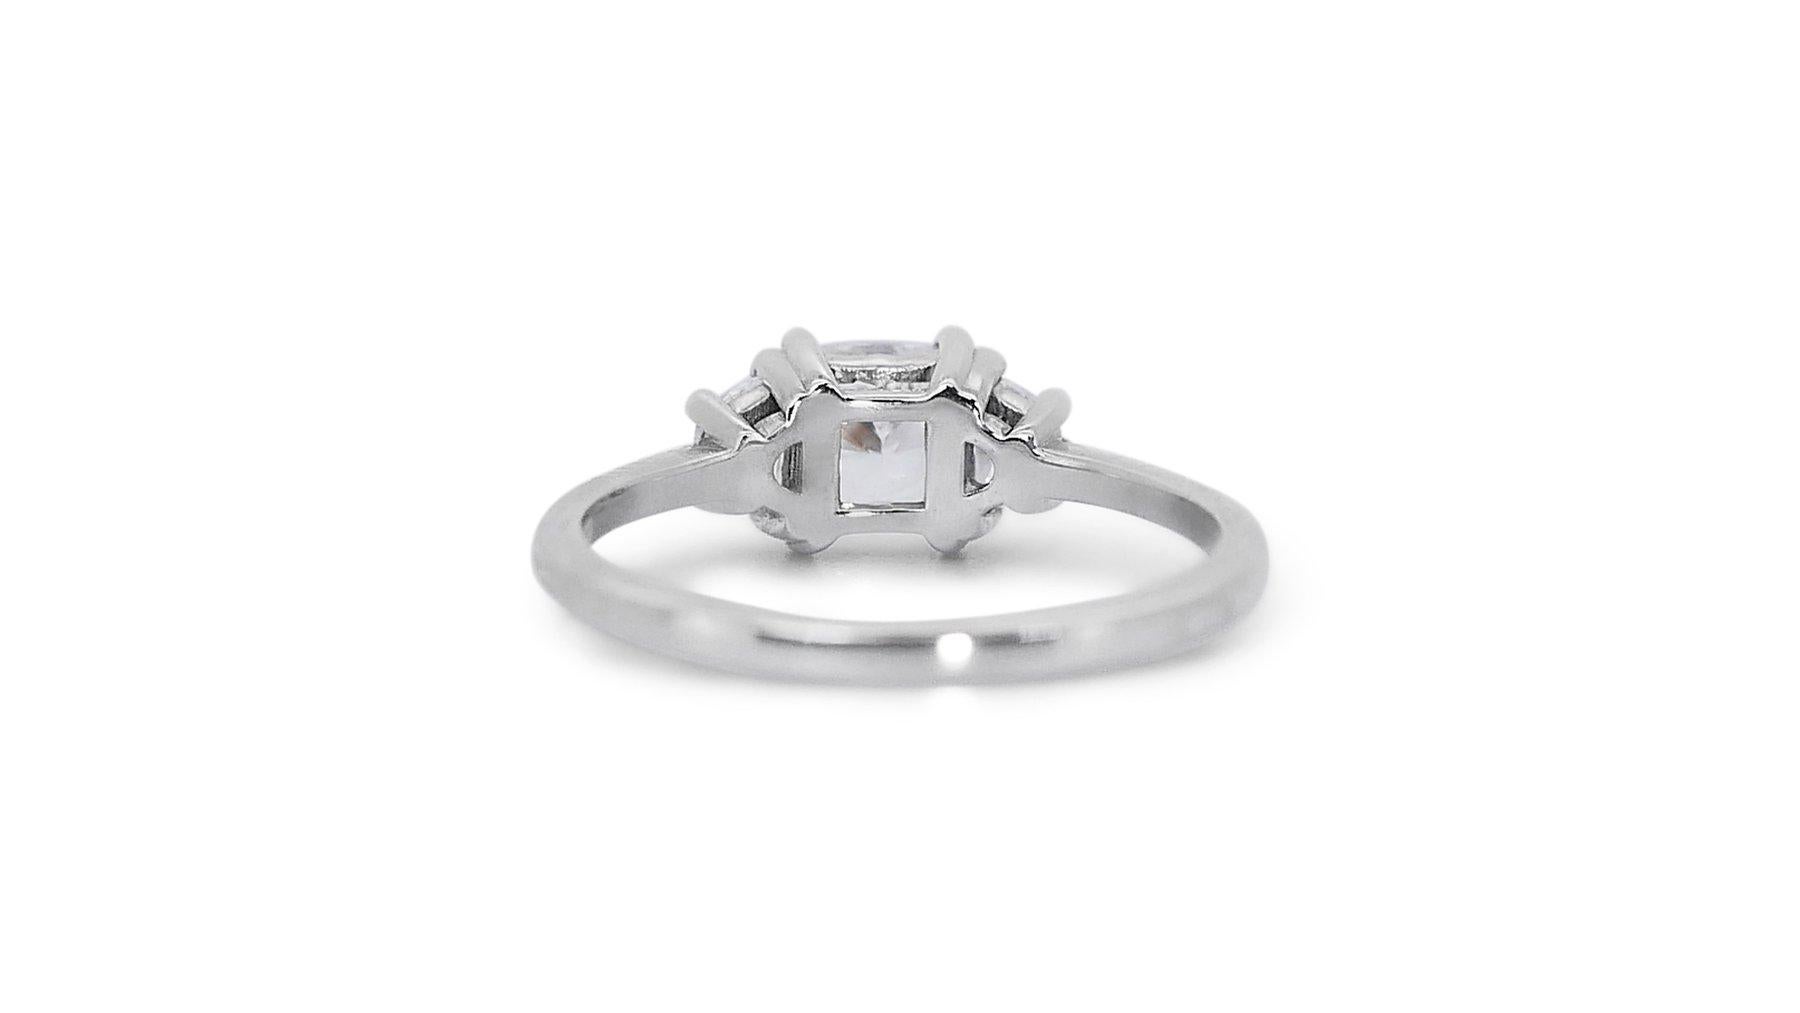 Captivating 18K White Gold Natural Diamond Halo Ring w/1.31 Carat- GIA Certified For Sale 3